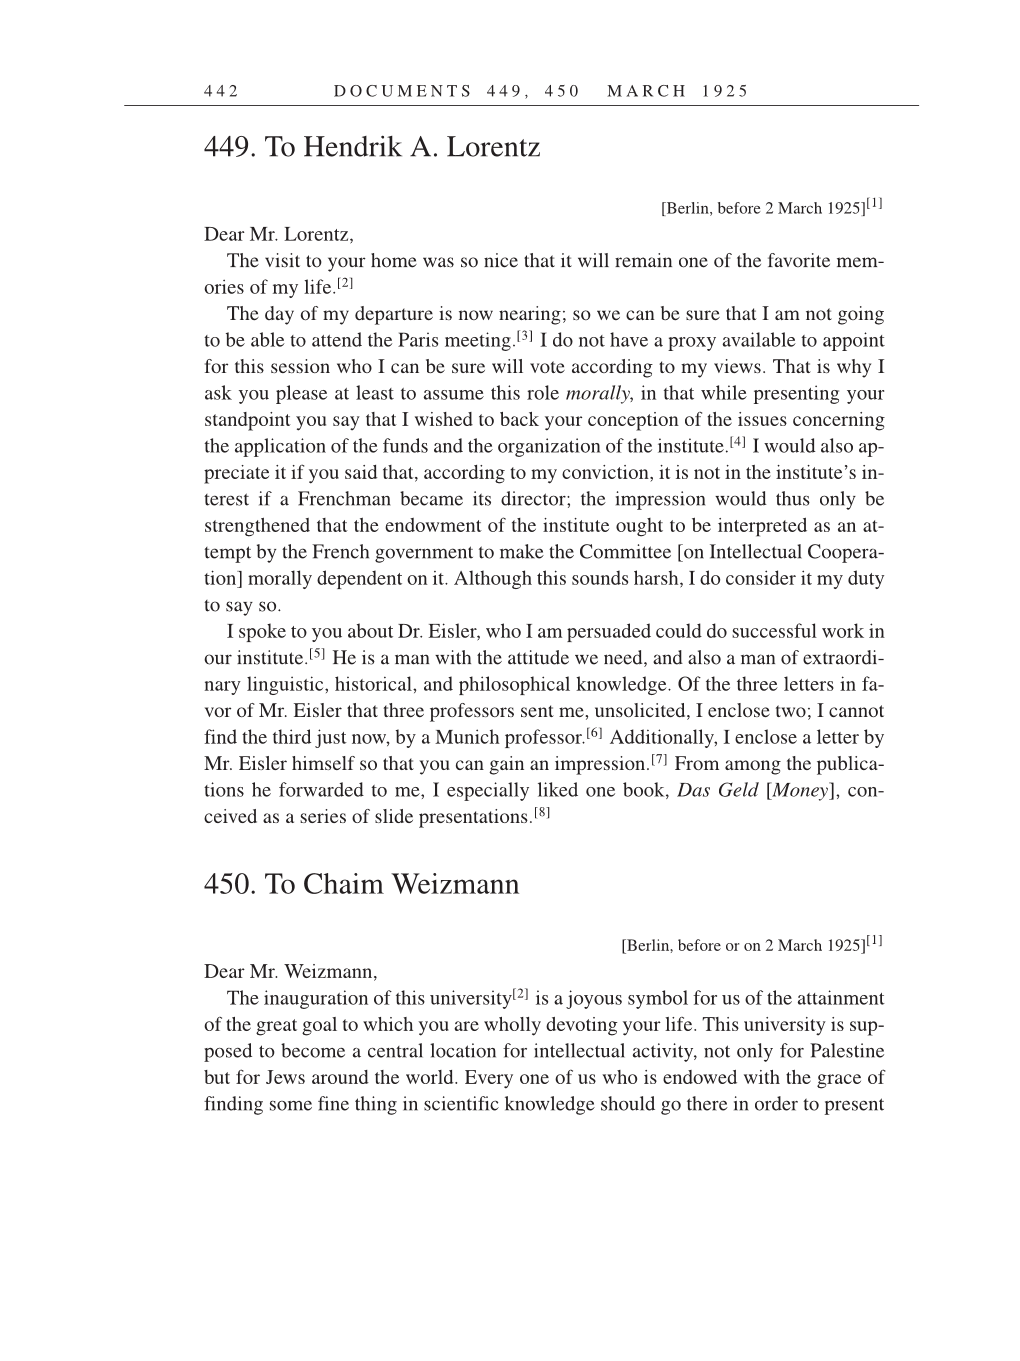 Volume 14: The Berlin Years: Writings & Correspondence, April 1923-May 1925 (English Translation Supplement) page 442